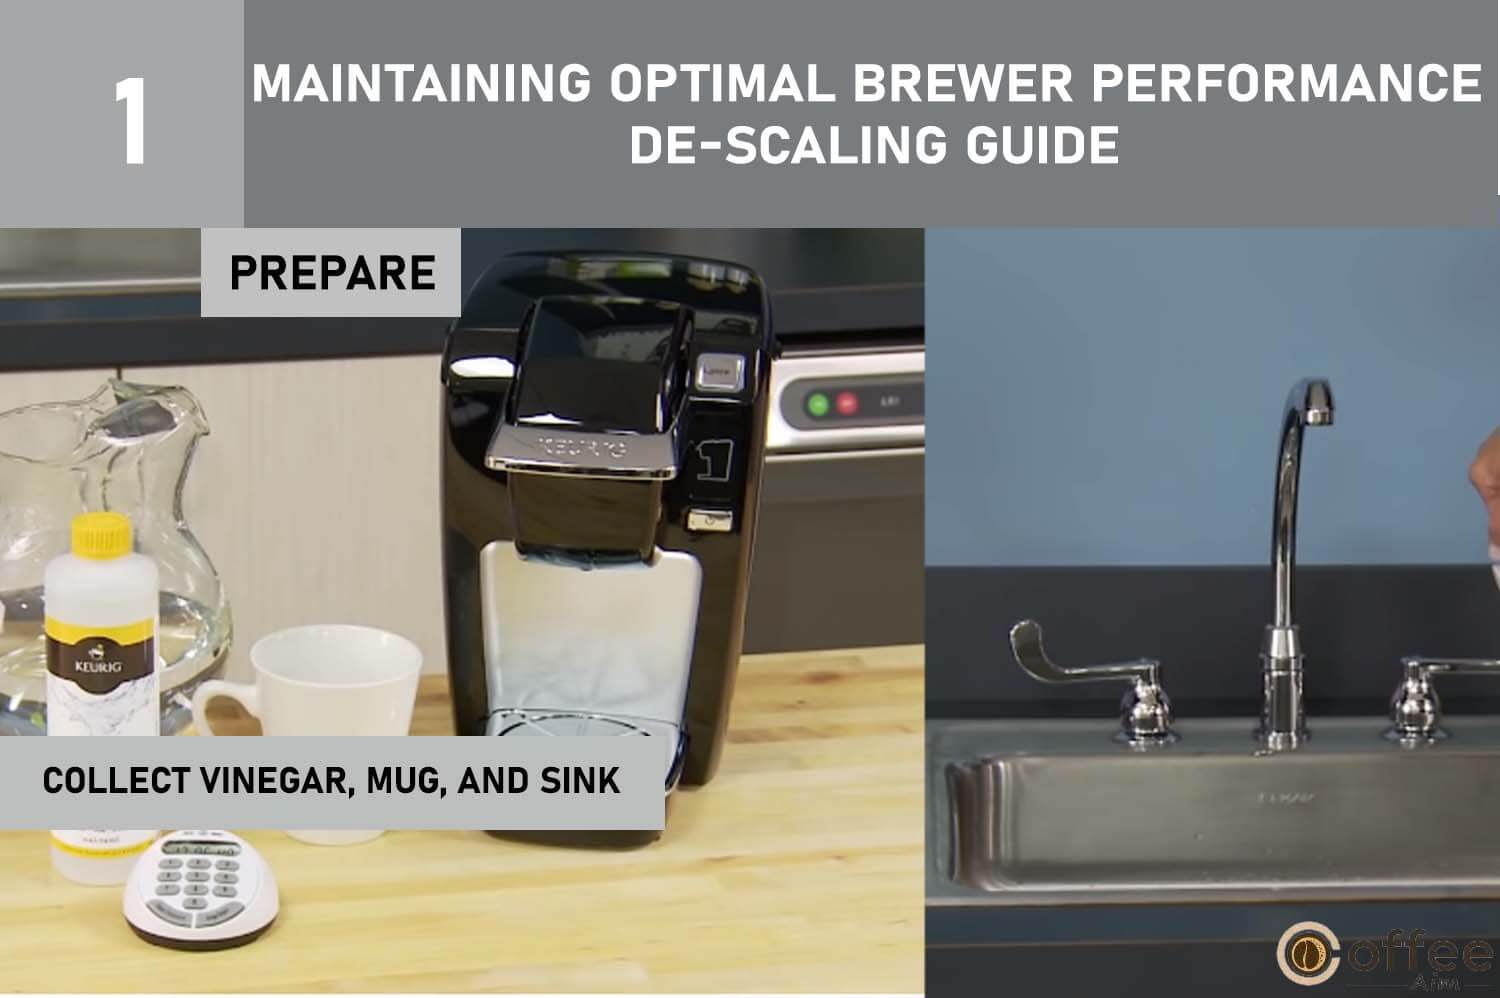 The provided image illustrates the "PREPARE" phase as part of the comprehensive "Maintaining Optimal Brewer Performance: De-scaling Guide" within the article on "How To Use Keurig B-31."